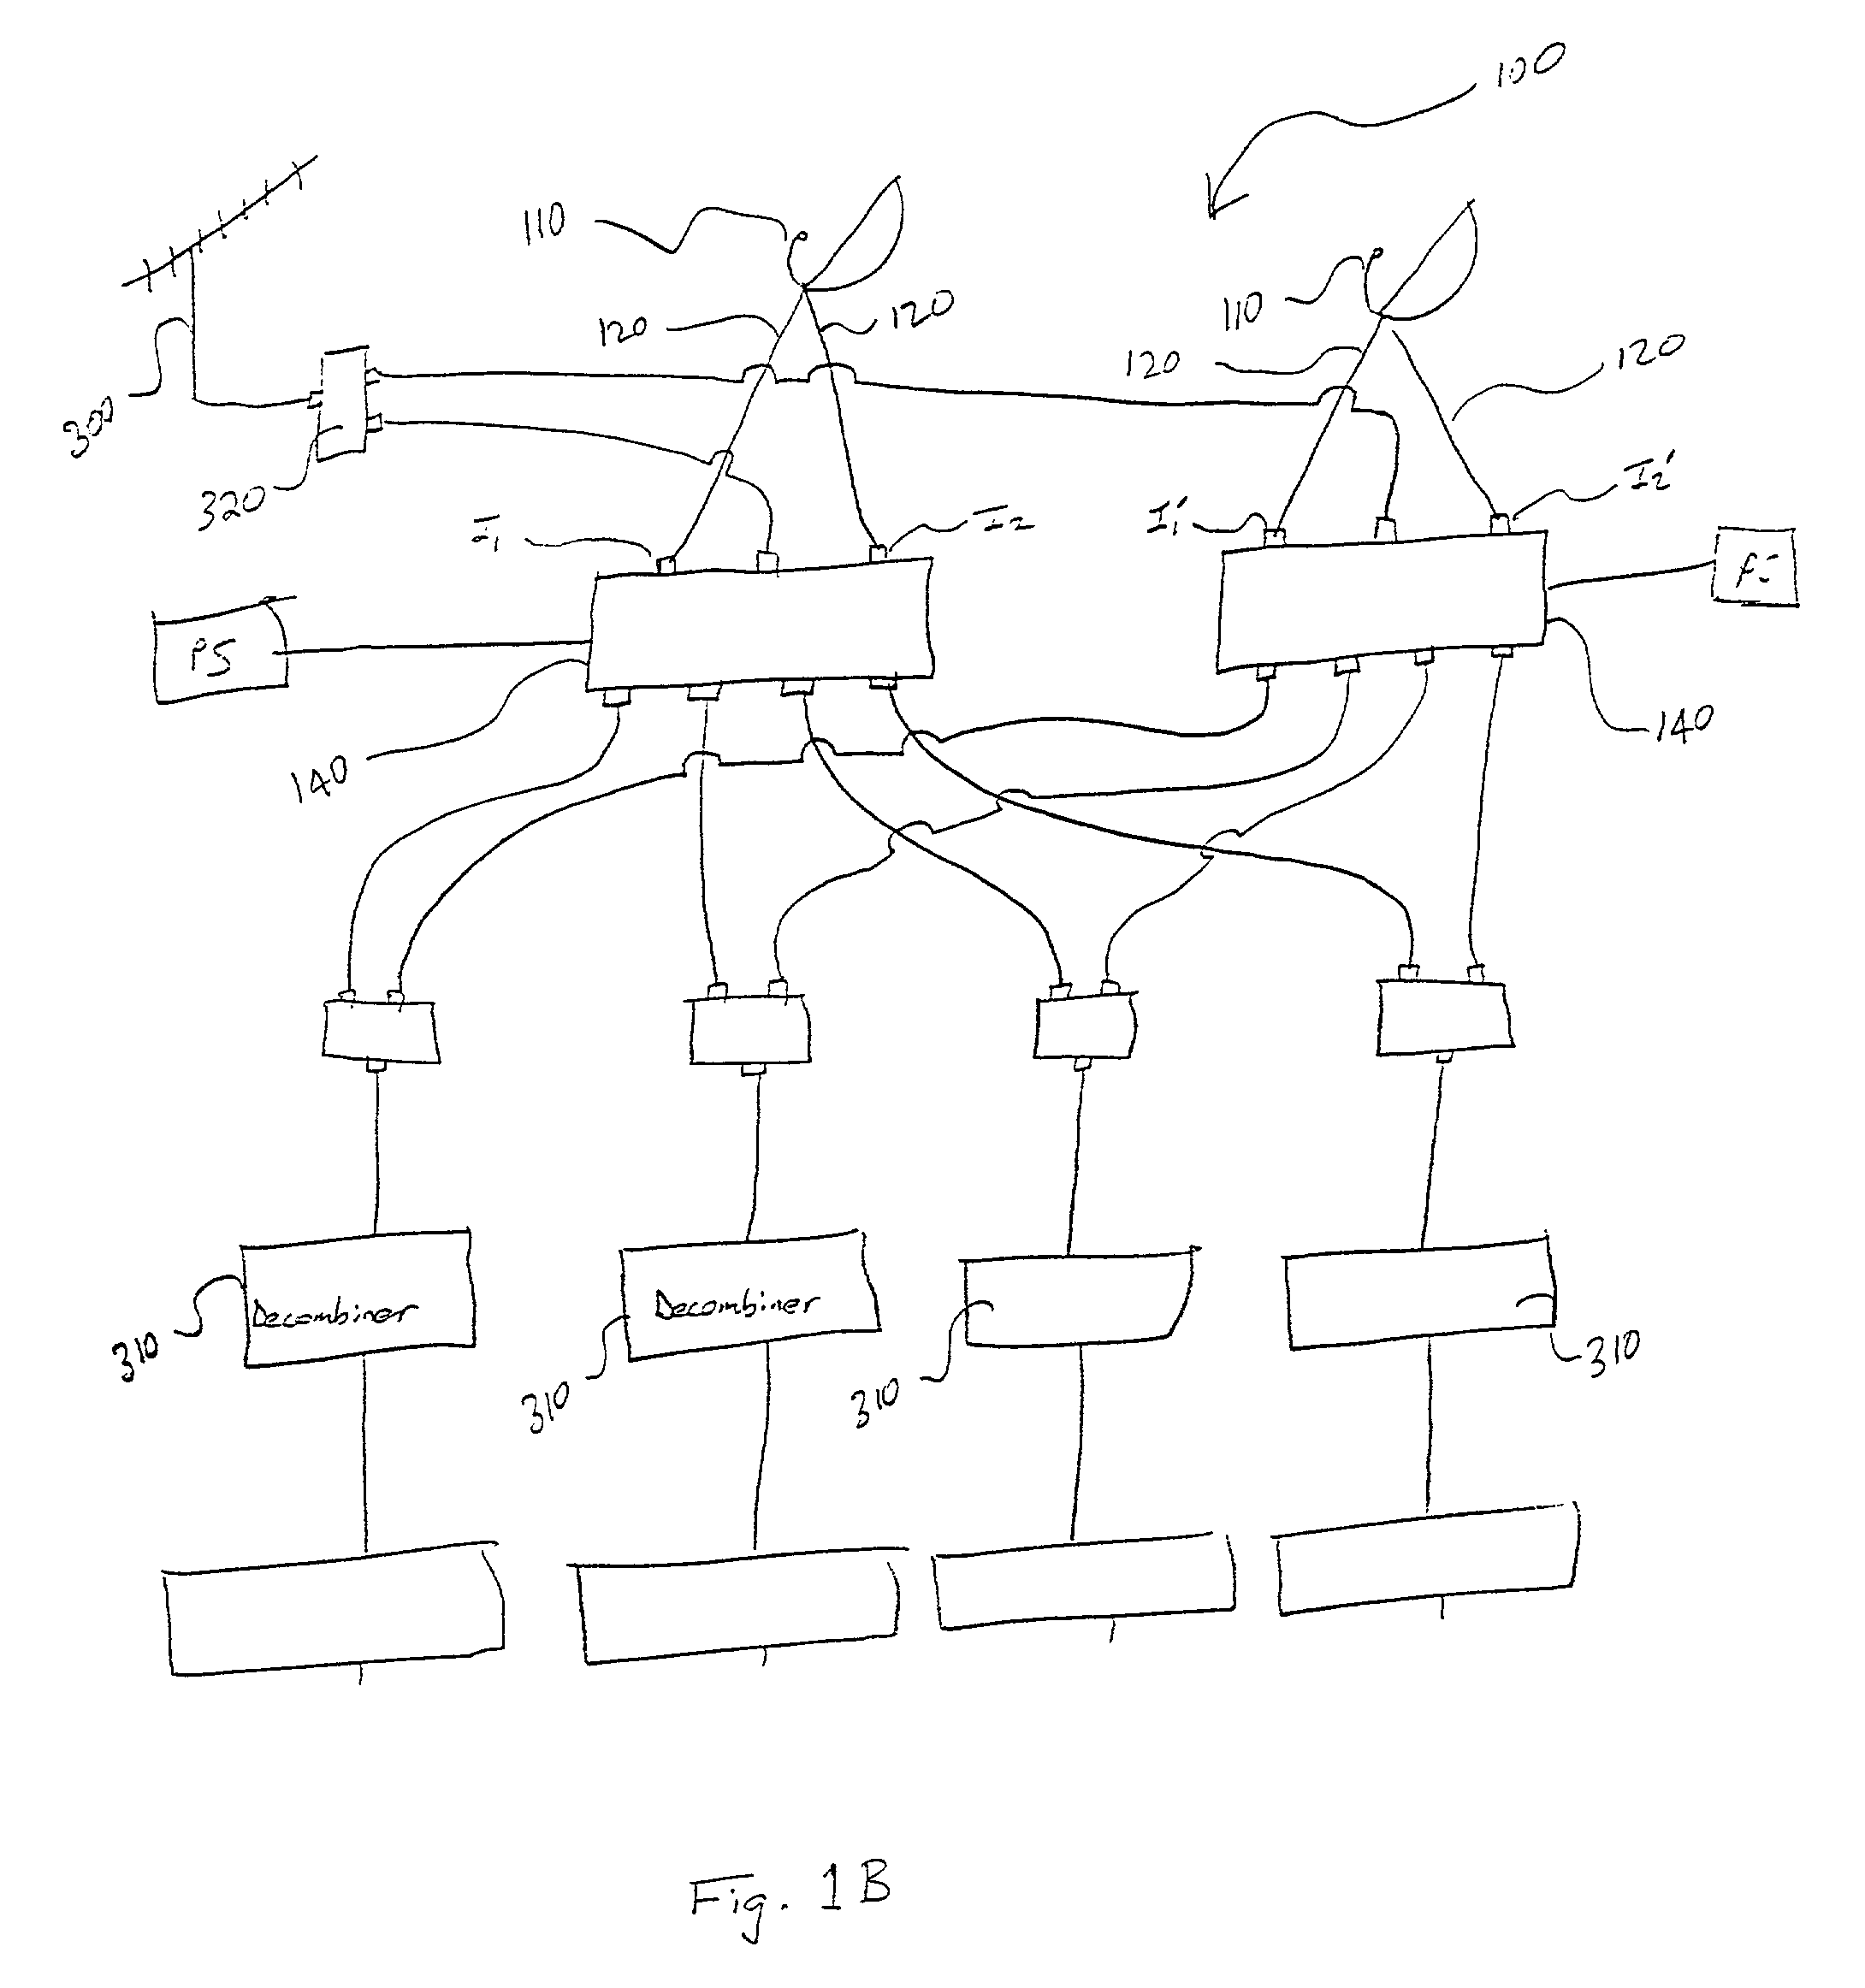 System and method for providing satellite signals to multiple receiving units